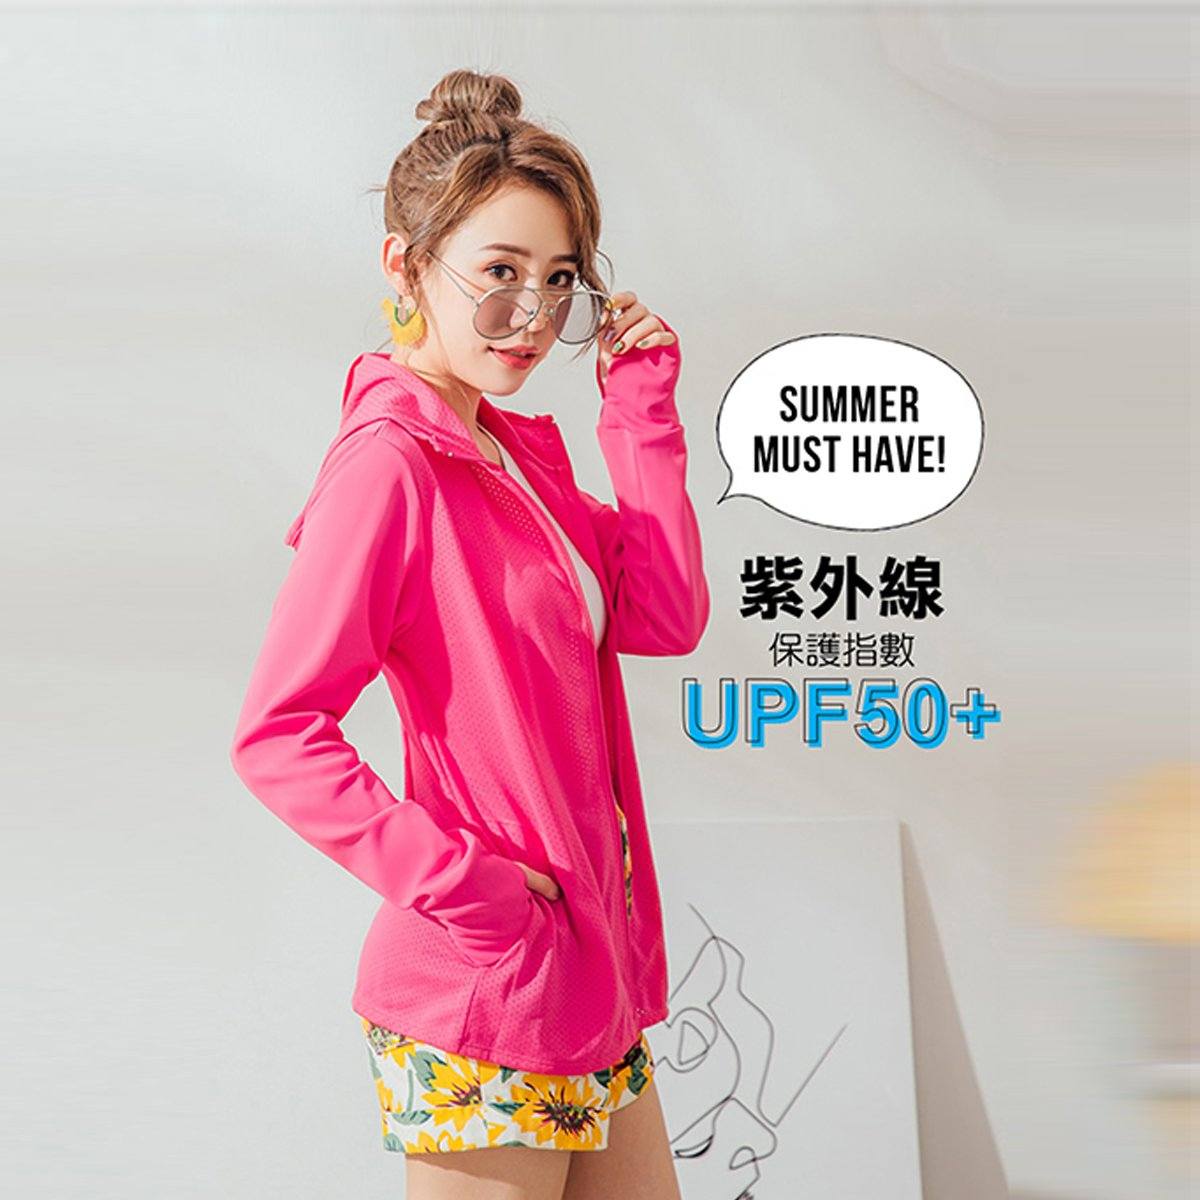 ($9.90 Only) Eheart UV-Cut Cooling Hoodie Jacket - Bloom Concept